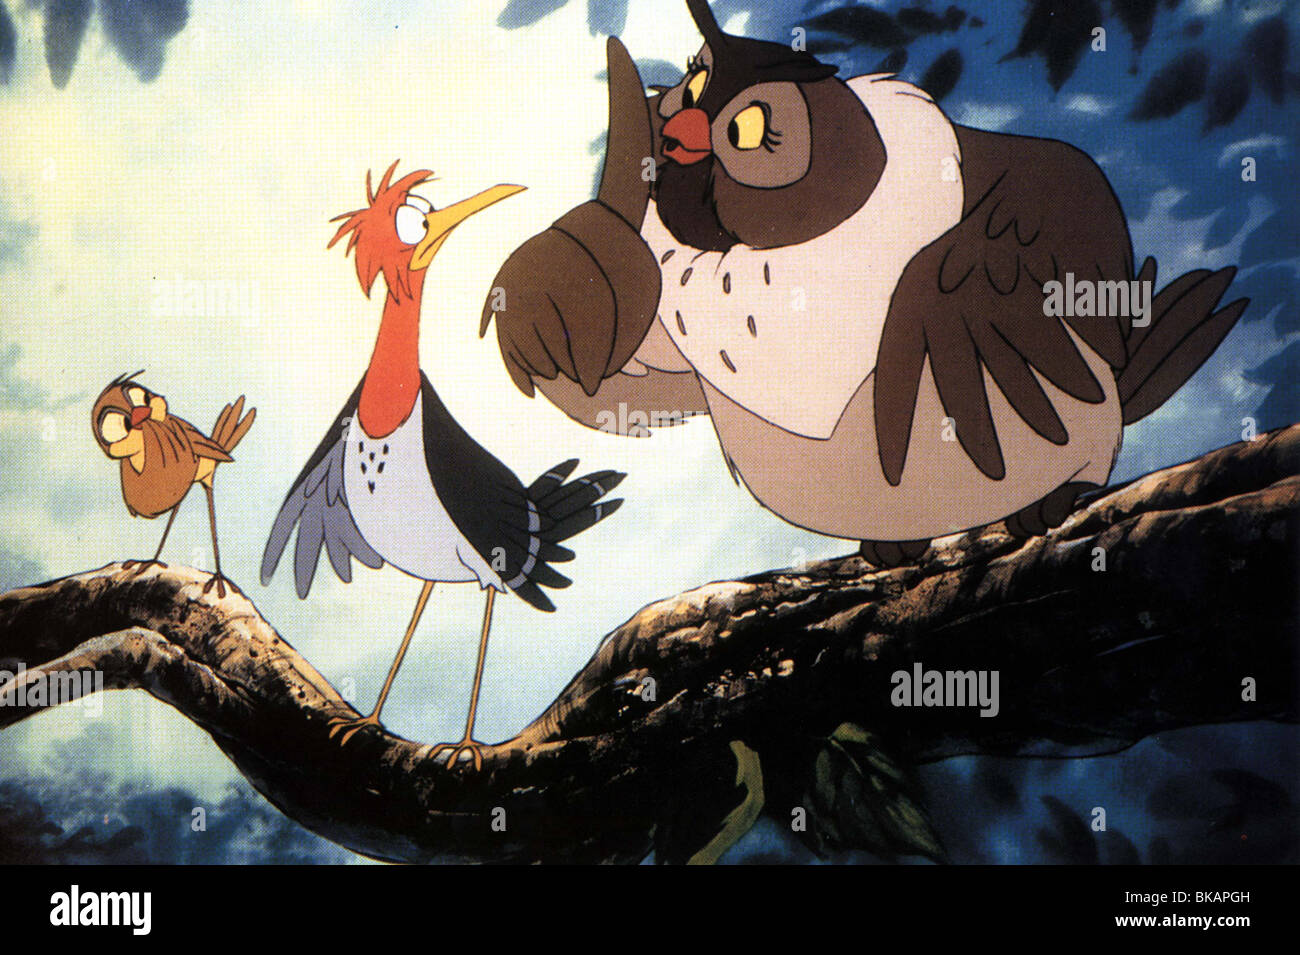 THE FOX AND THE HOUND (ANI - 1981) ANIMATED CREDIT DISNEY FATH 005FOH MOVIESTORE COLLECTION LTD Stock Photo